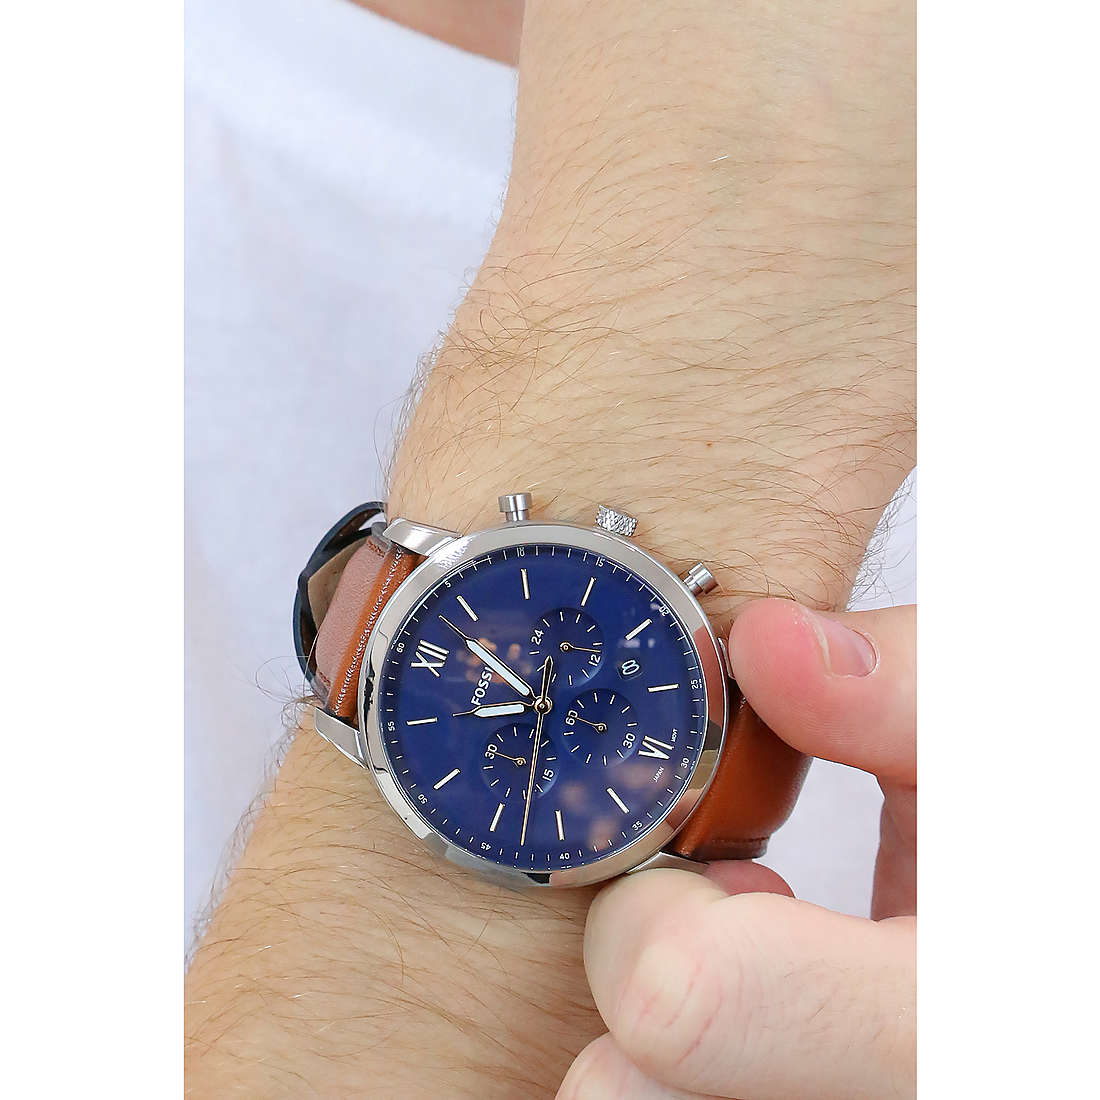 Fossil chronographes Neutra homme FS5453 photo wearing